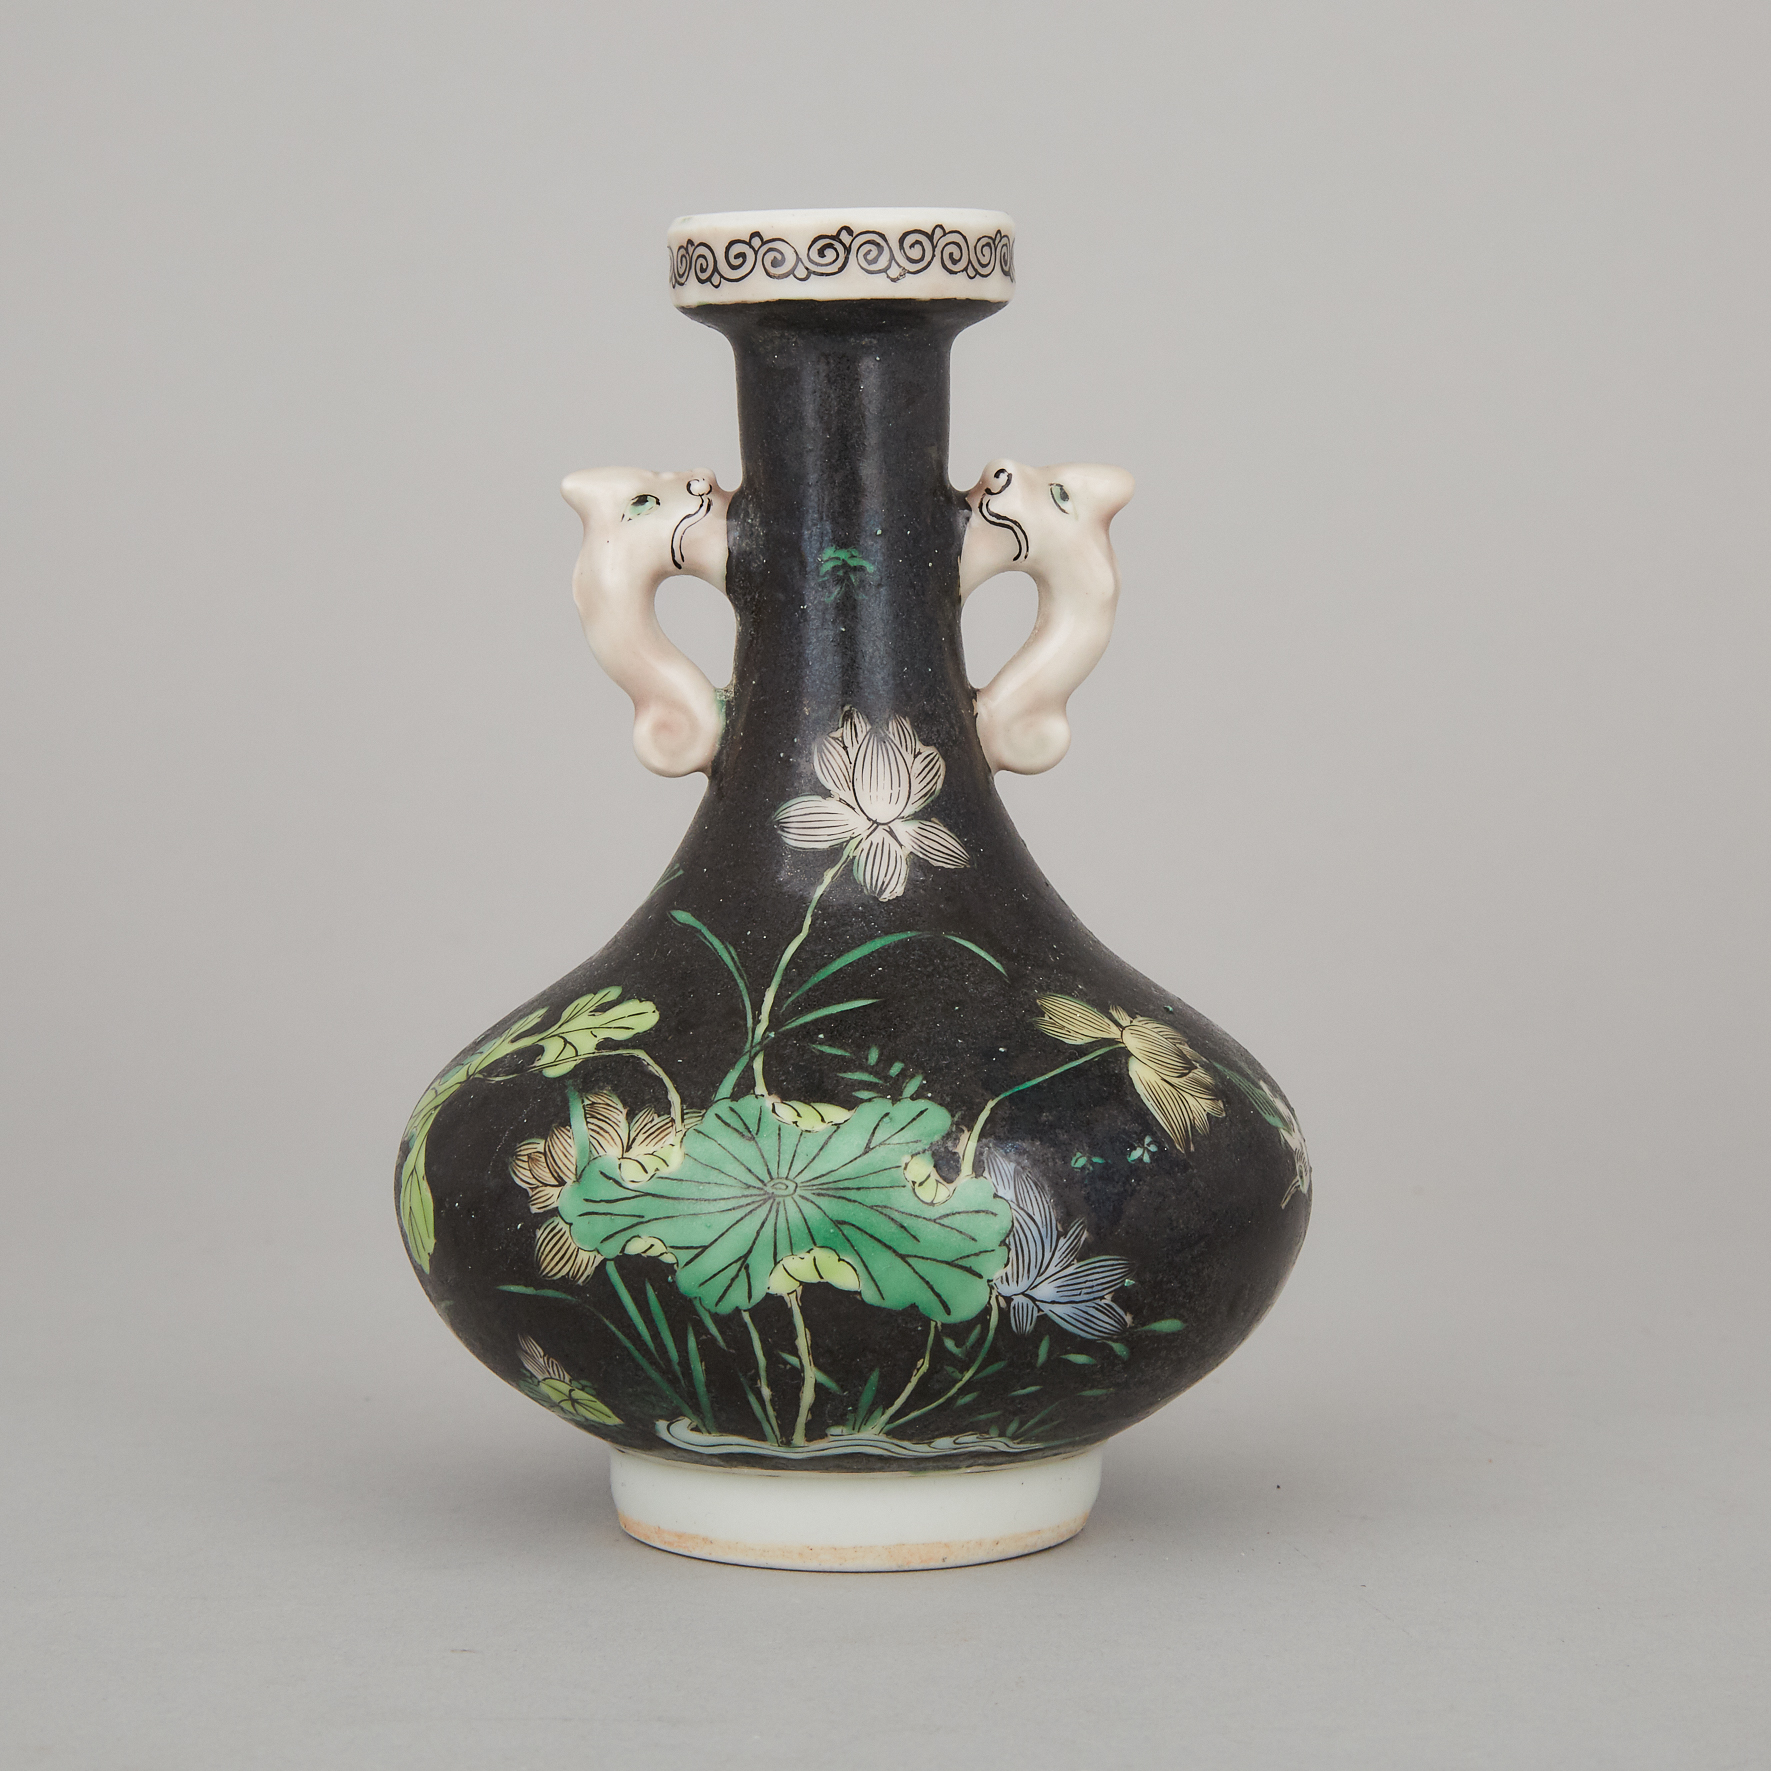 A Small Kangxi-Style Famille Noire Vase